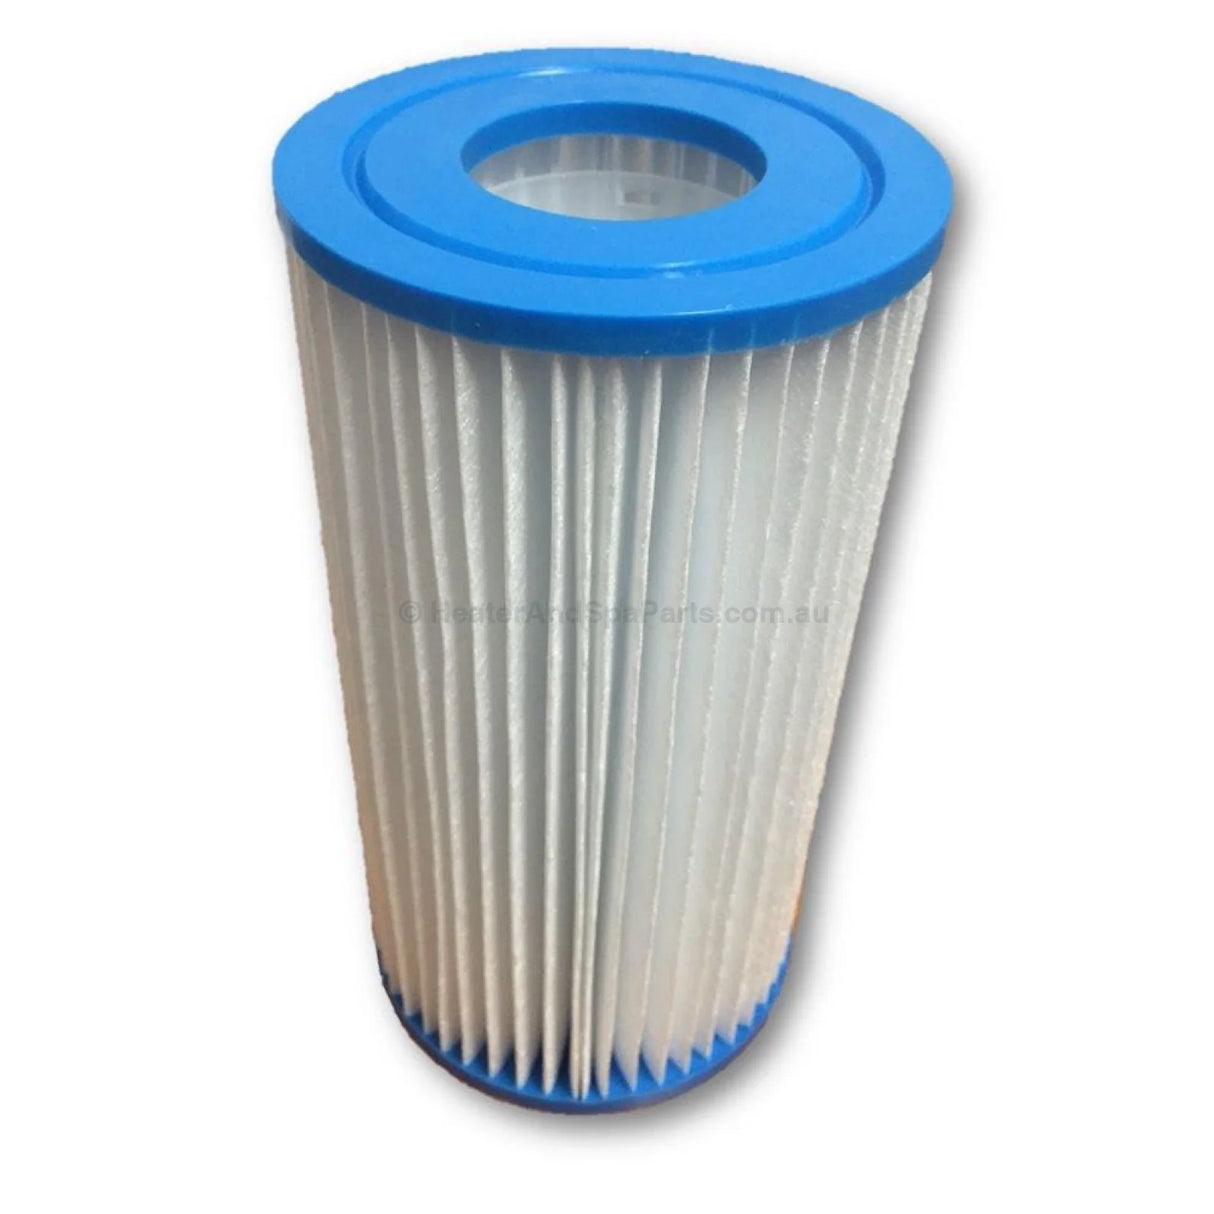 204mm x 108mm Intex Type "A" / Krystal Clear 8 Replacement Cartridge Filter - Heater and Spa Parts